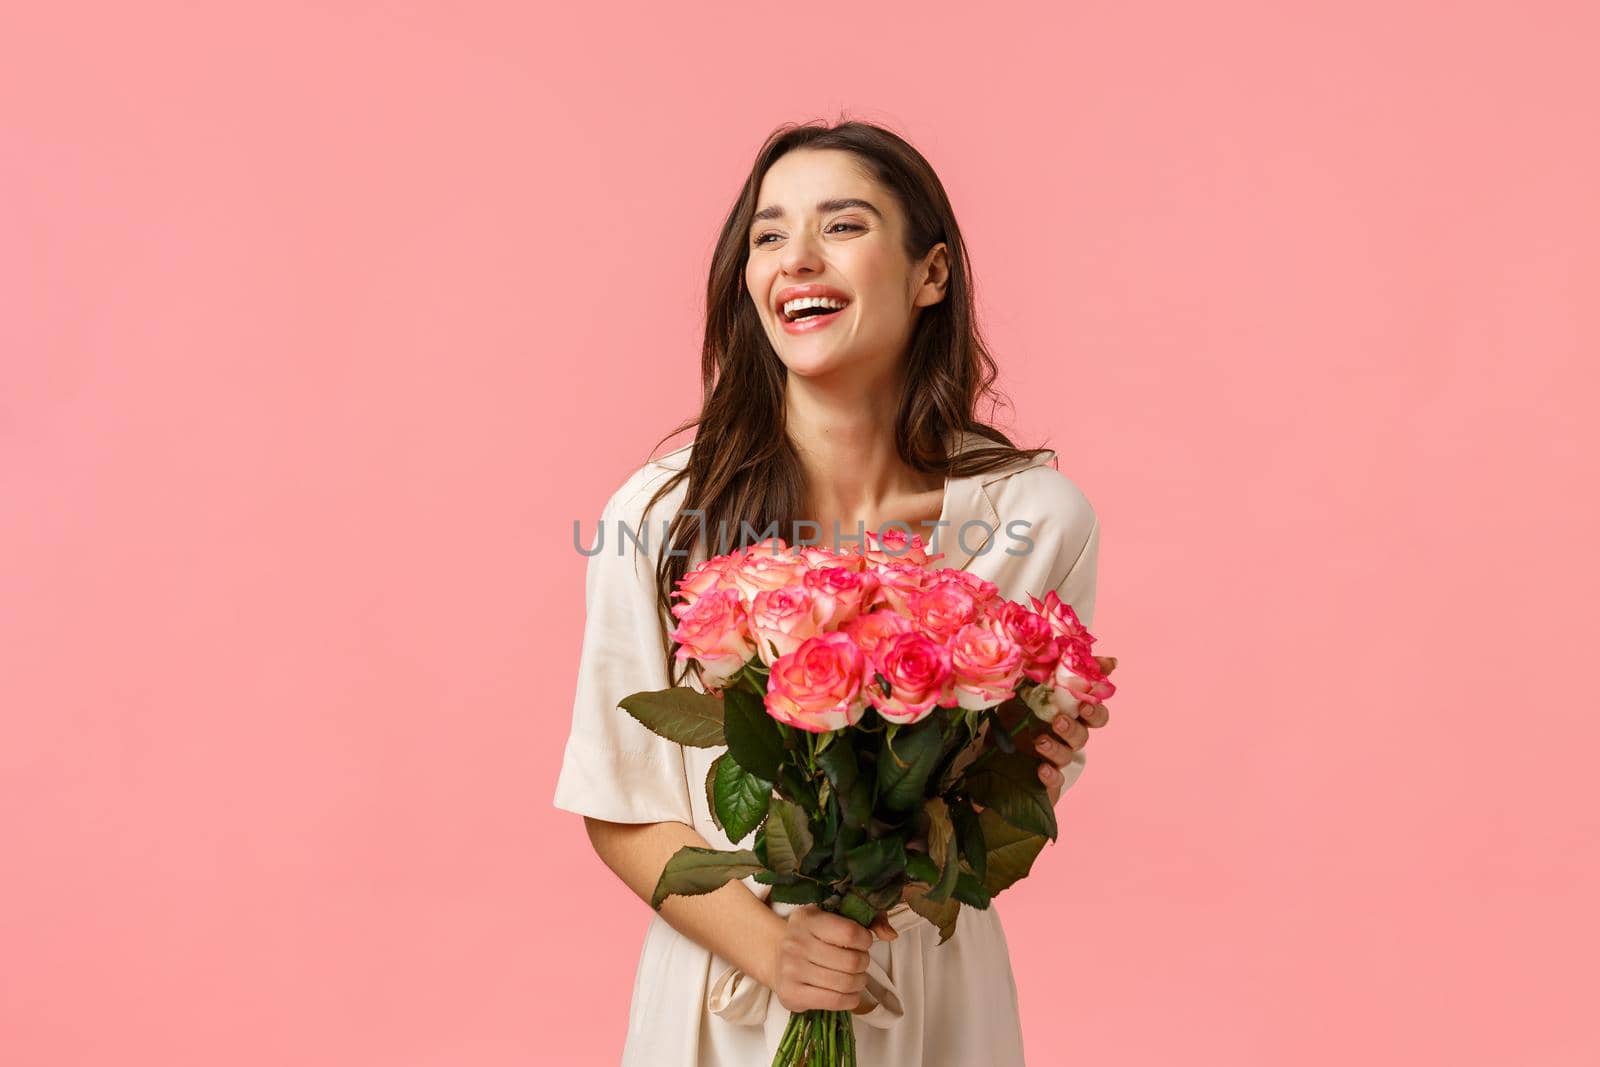 Valentines day, romance, celebration and beauty concept. Charming elegant and feminine young woman receive flowers, holding beautiful bouquet and laughing joyfully, pink background.